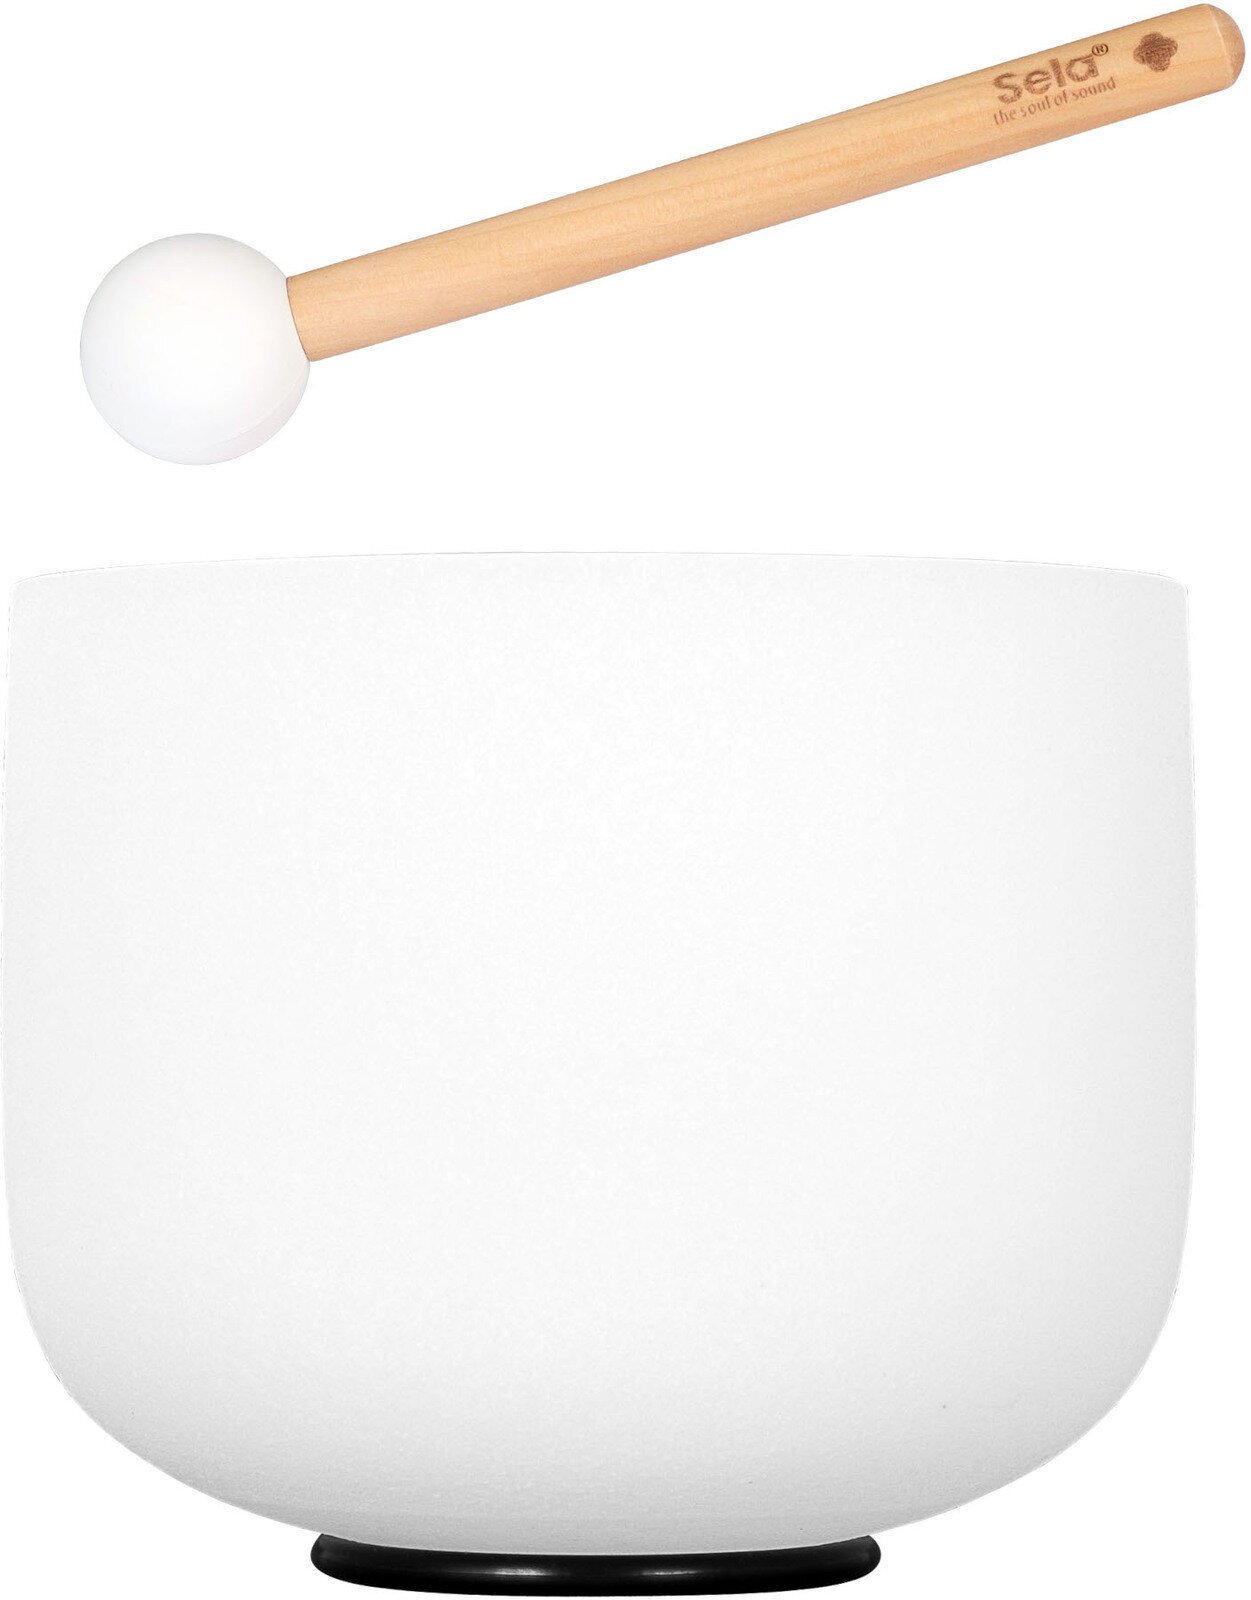 Percussão para musicoterapia Sela 10" Crystal Singing Bowl Frosted 440 Hz E incl. 1 Wood Mallet